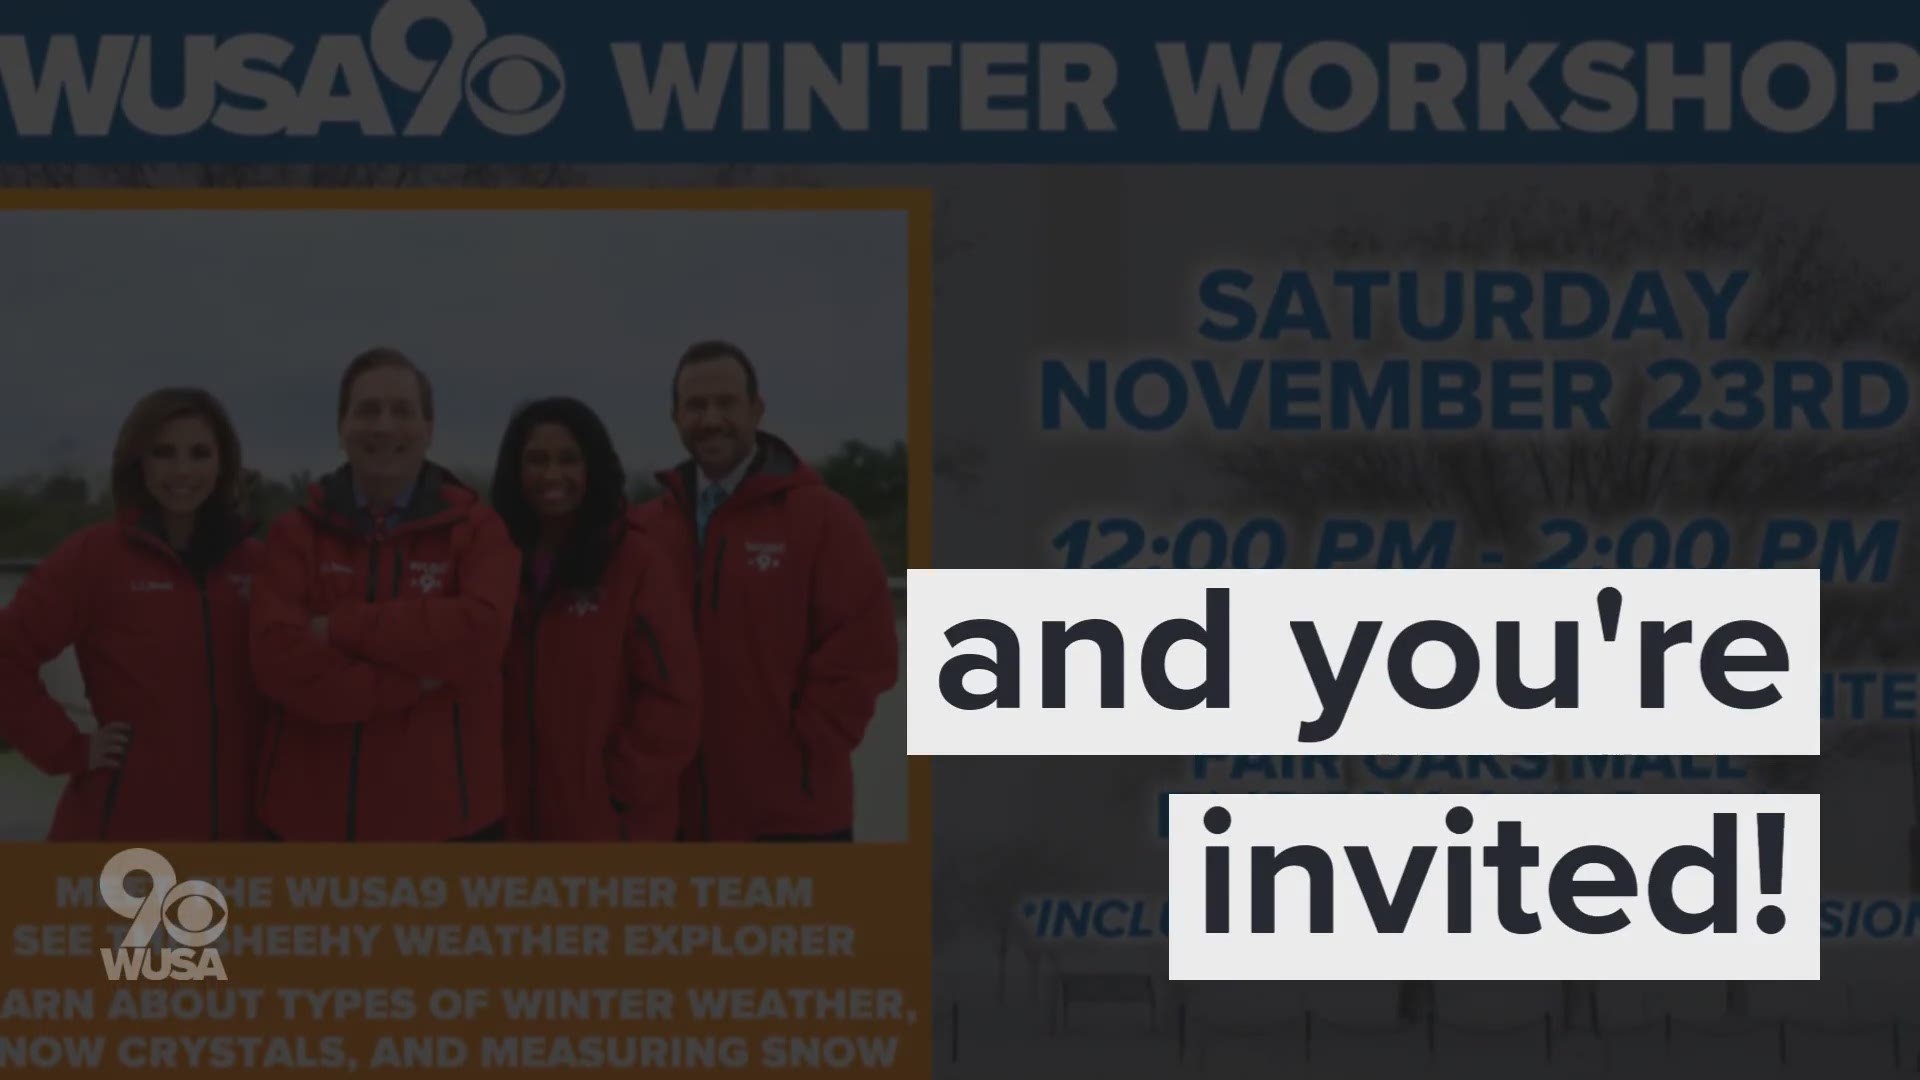 Meet the team, see the Sheehy Weather Explorer and learn about the science of winter weather.